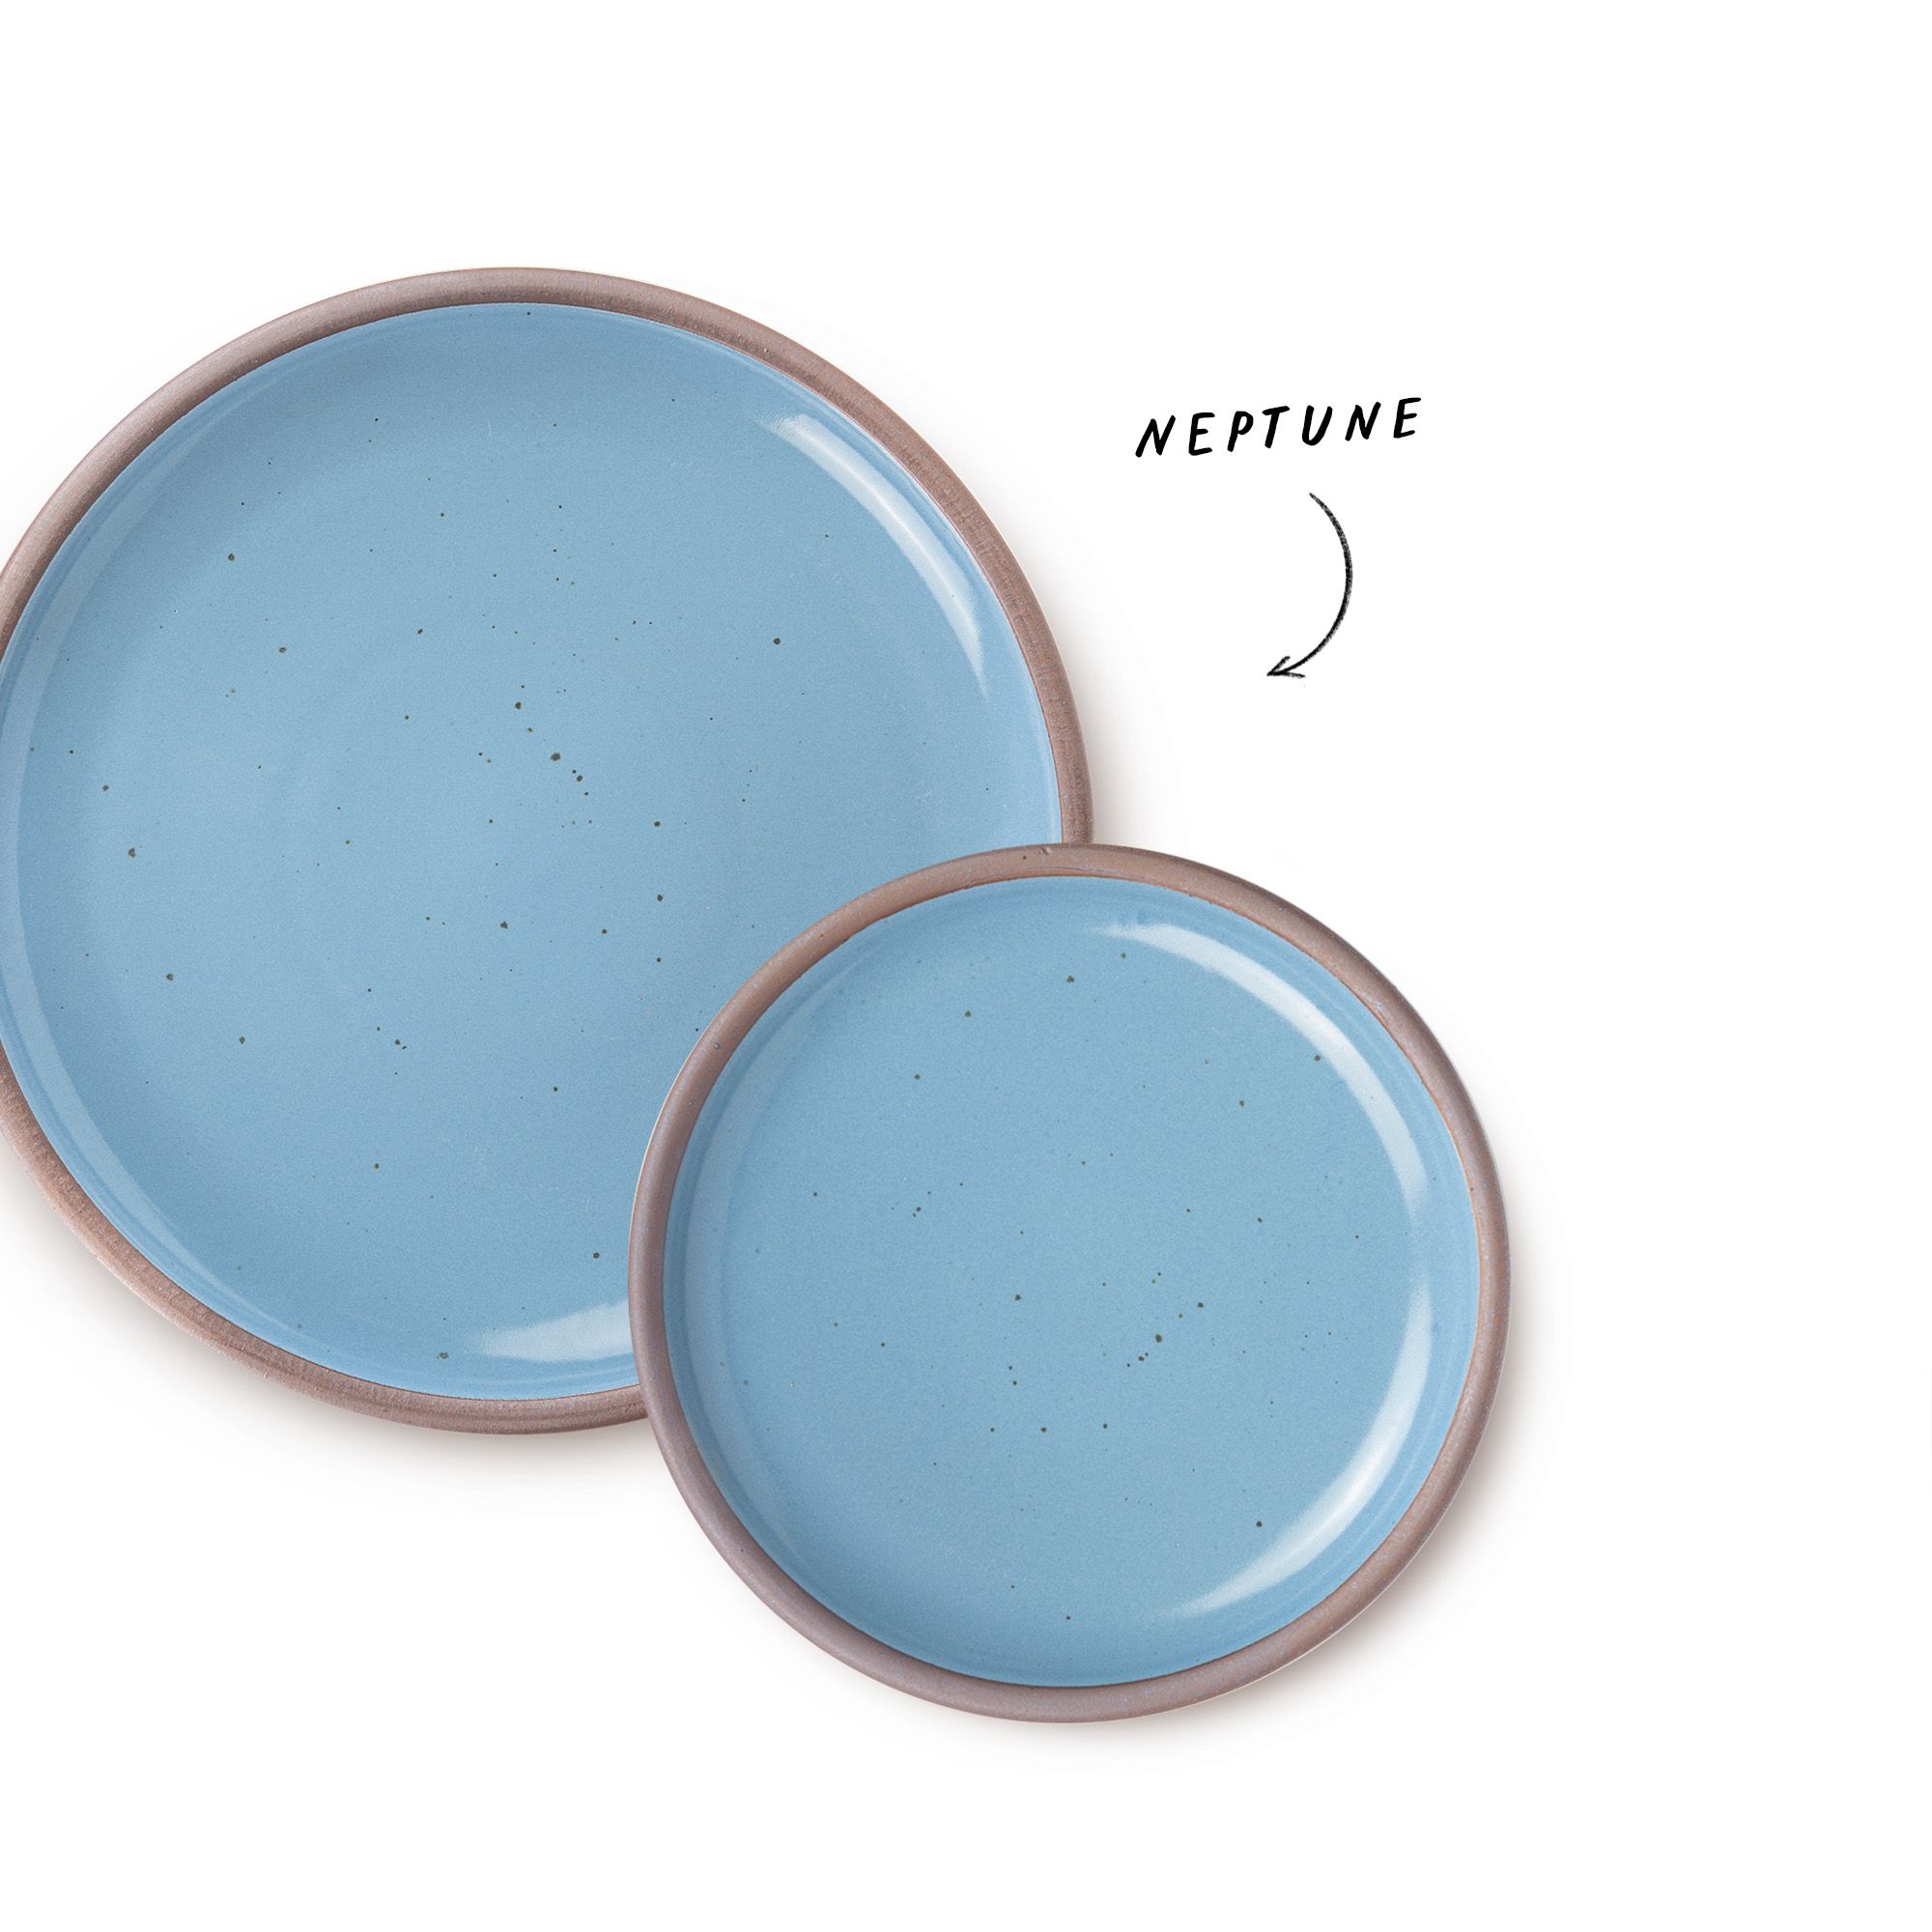 1 large and 1 small ceramic plate in a robin's egg blue with an arrow pointing to both that reads 'Neptune'